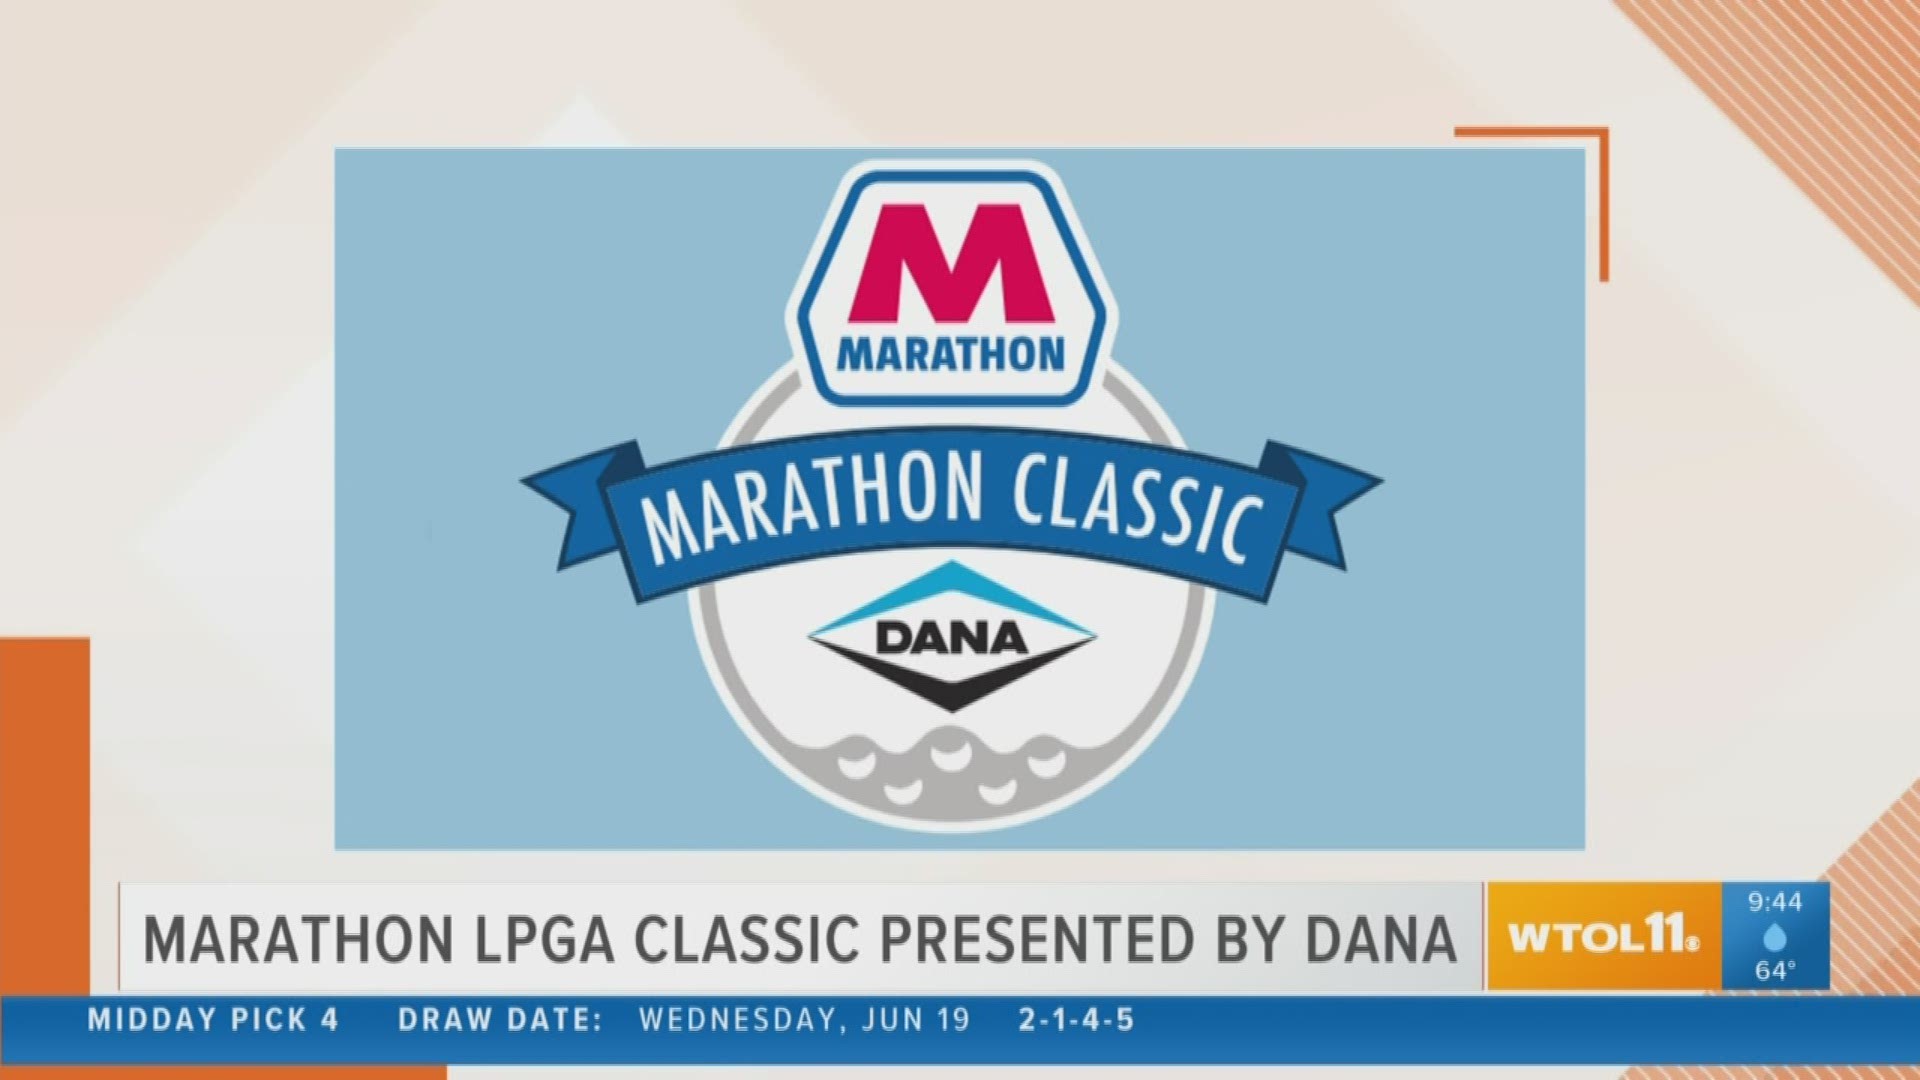 The Marathon LPGA Classic is coming up next month! Here's what to expect.